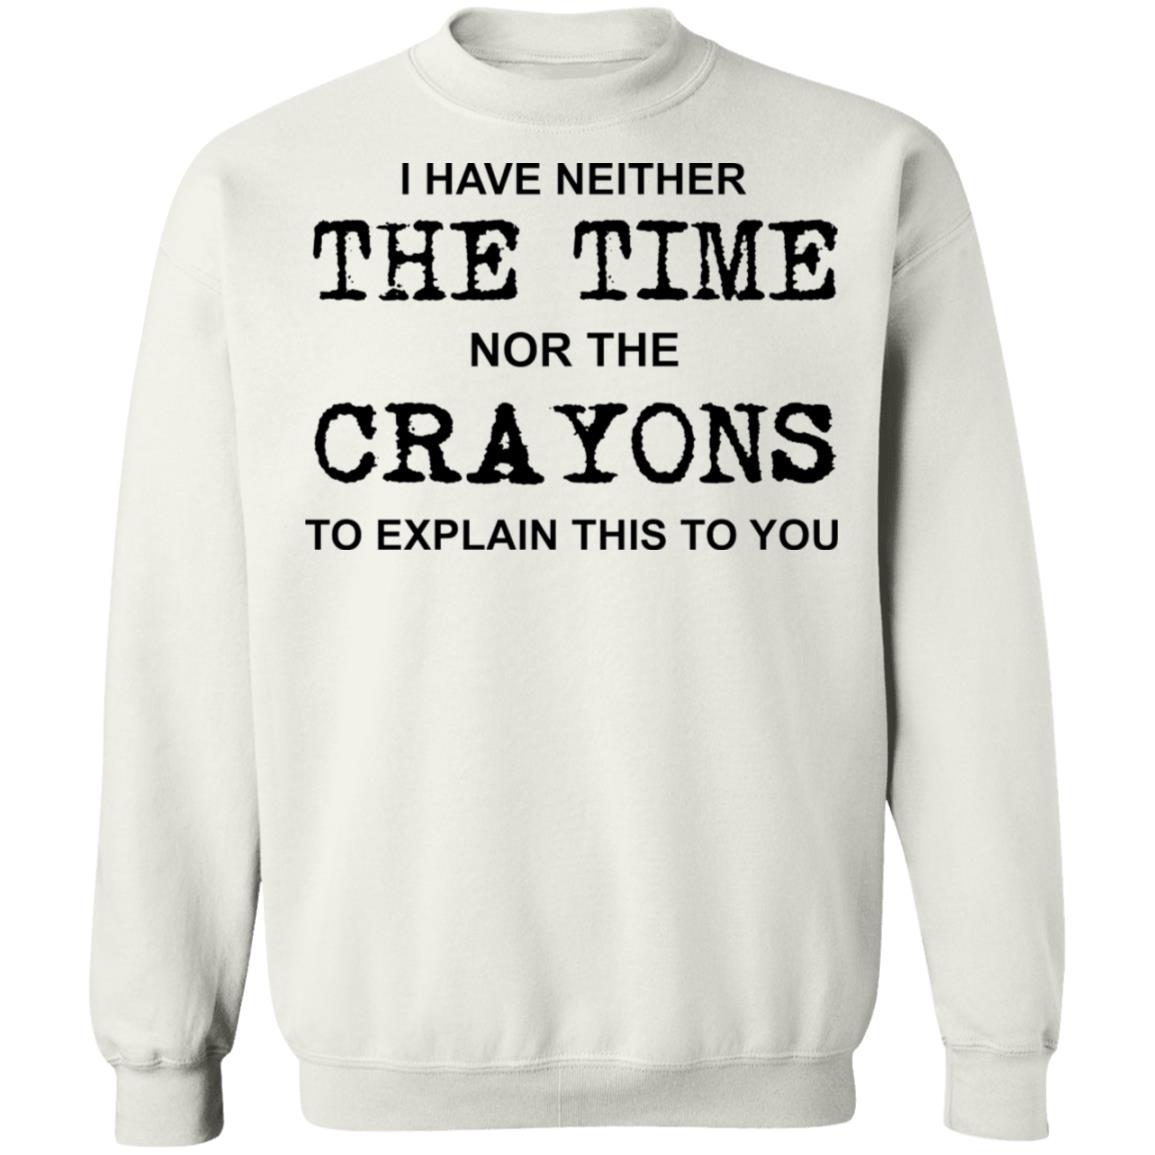 I Have Neither The Time Nor The Crayons To Explain This To You Shirt 2